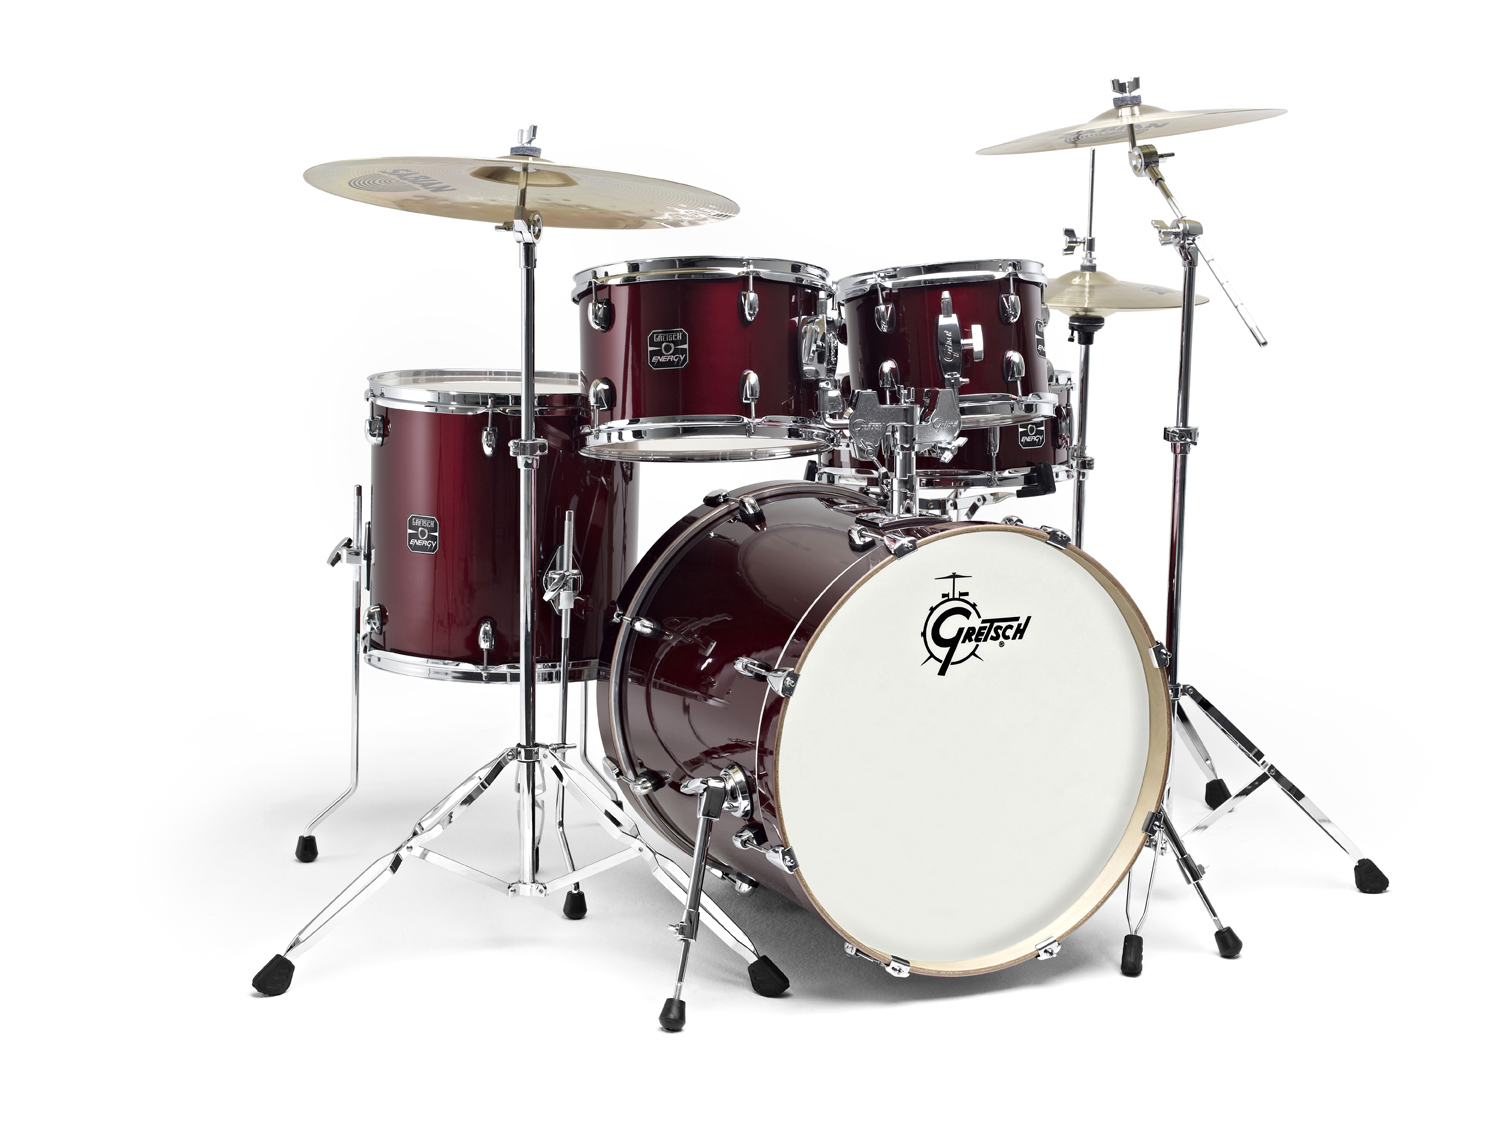 GRETSCH DRUMS NEW ENERGY FUSION 20 WINE RED + CYMBALES PAISTE 101